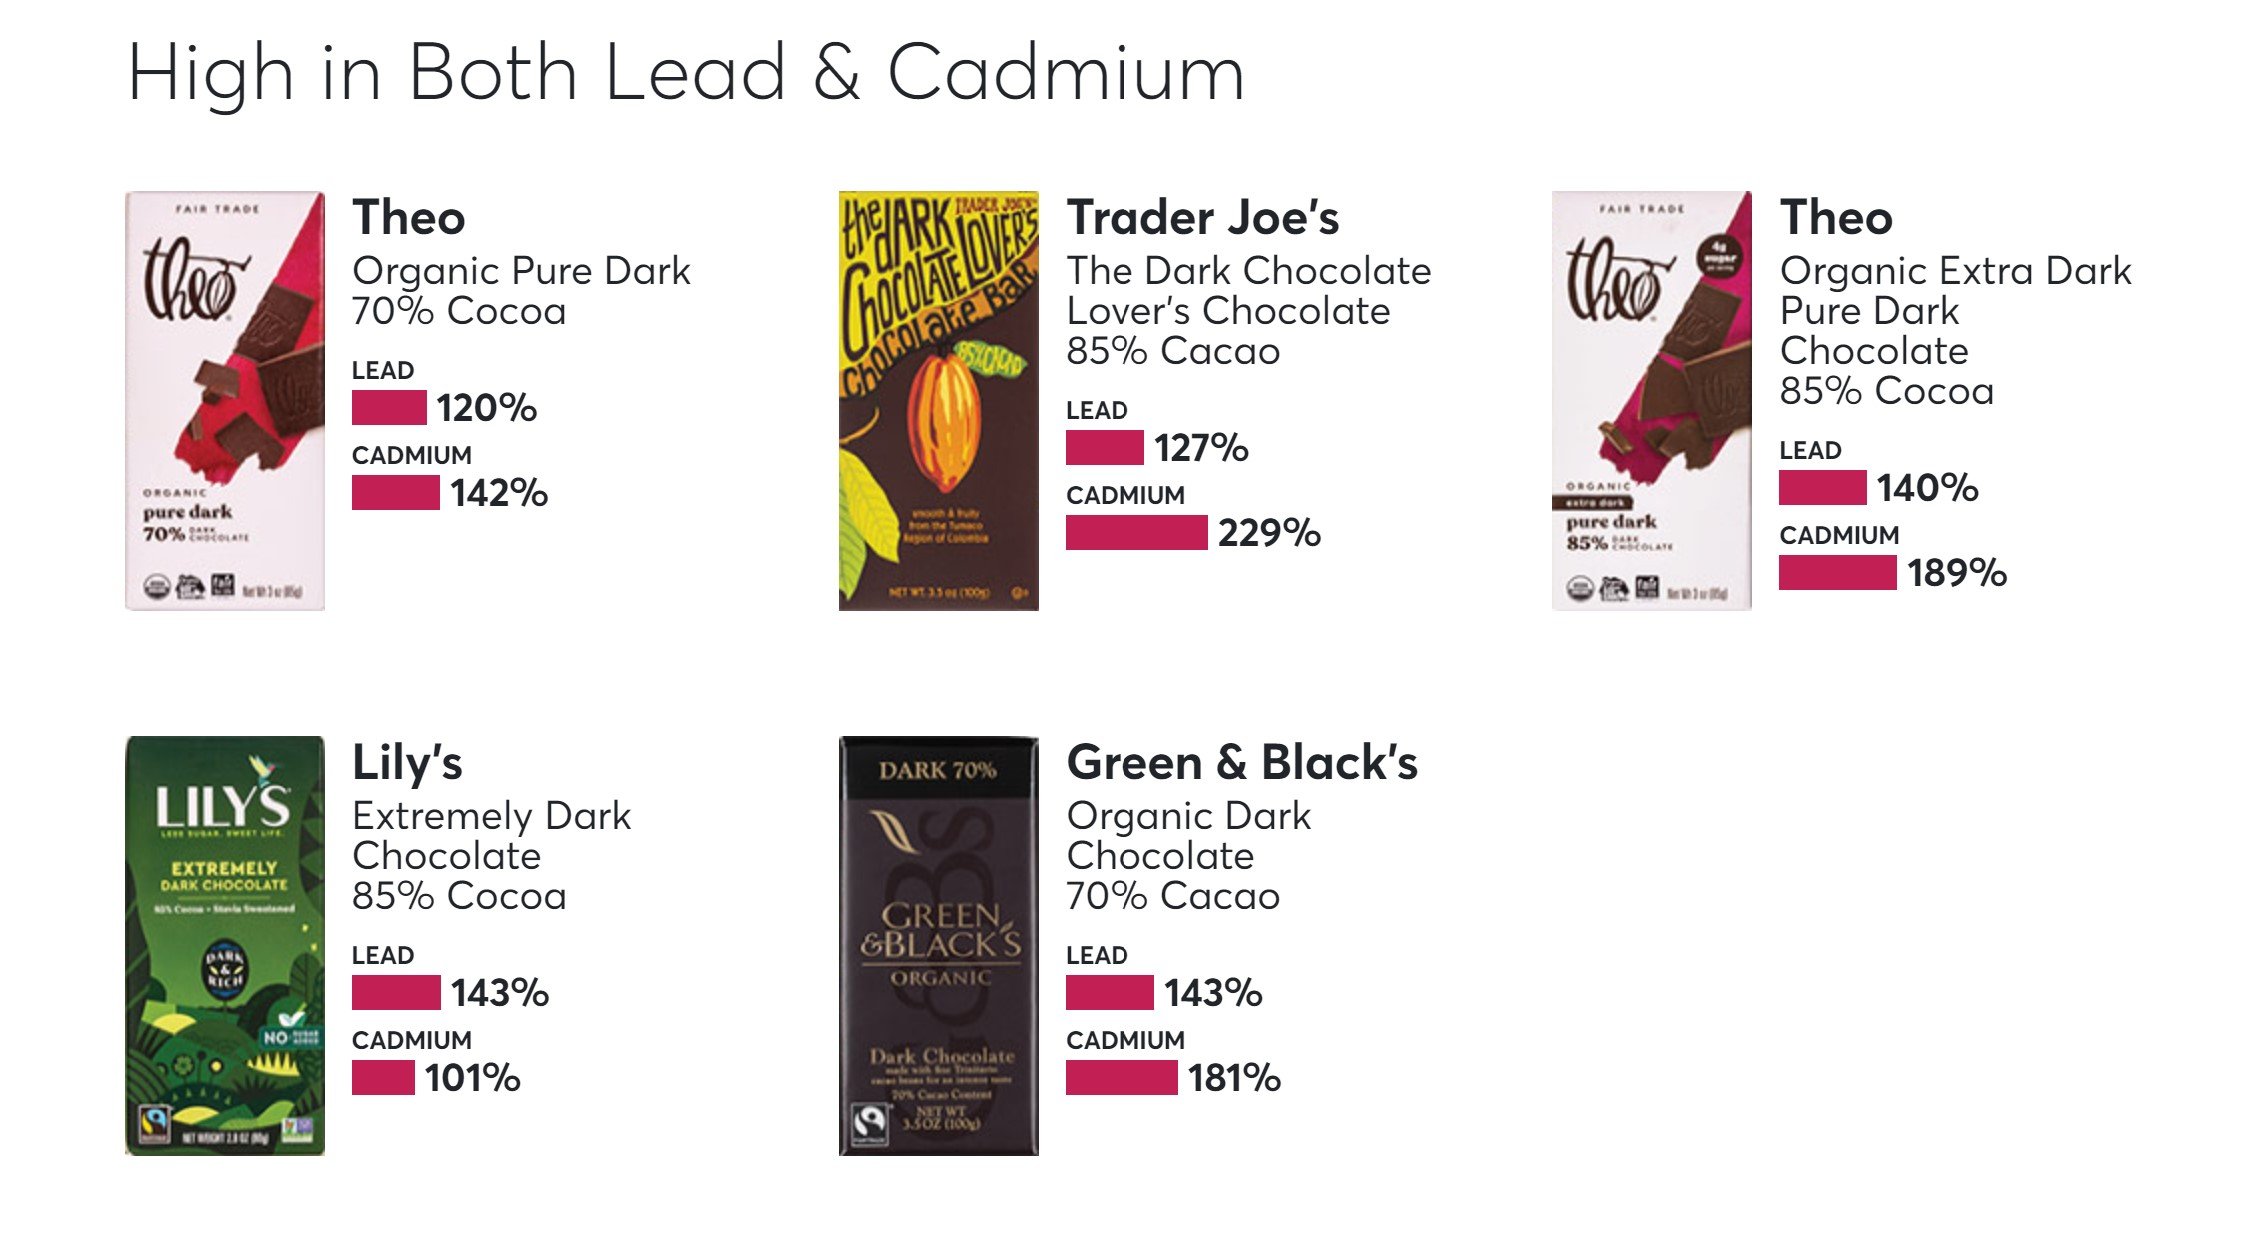 23 Chocolate Bars Contained by Unsafe Levels of Cadmium and Lead – Consumer Safety Study